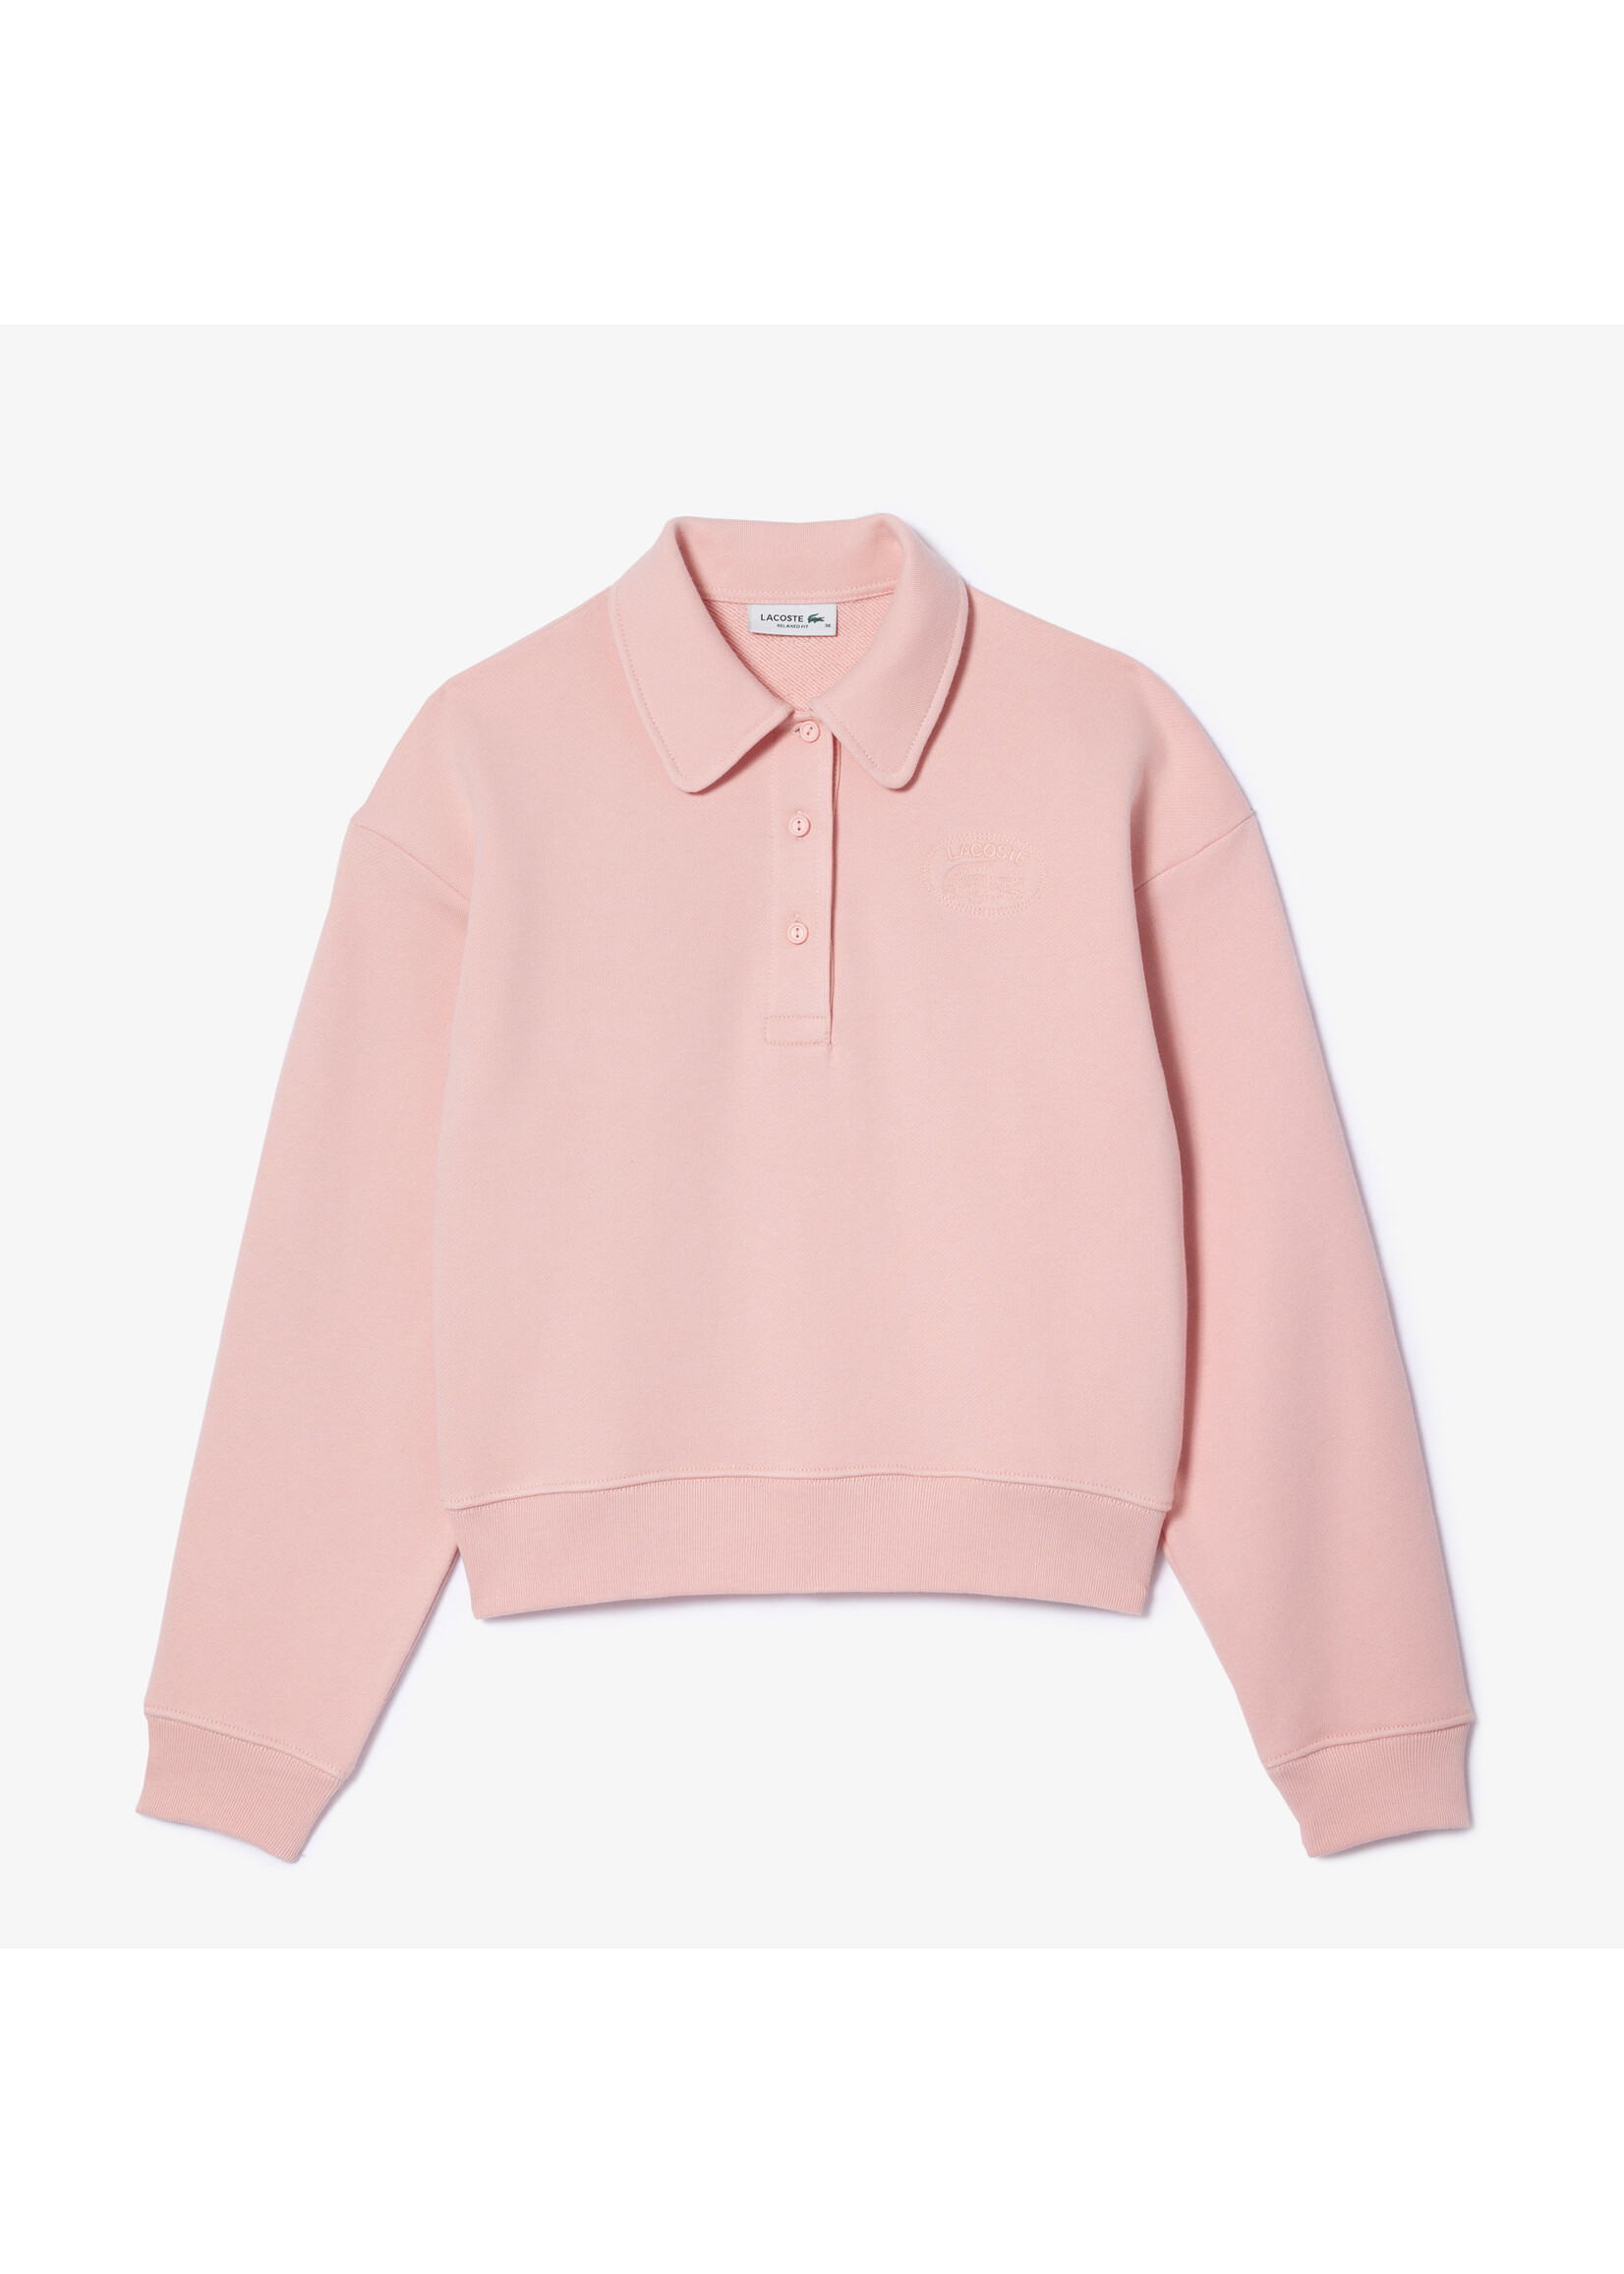 LACOSTE EMBROIDERED POLO NECK JOGGER SWEATSHIRT